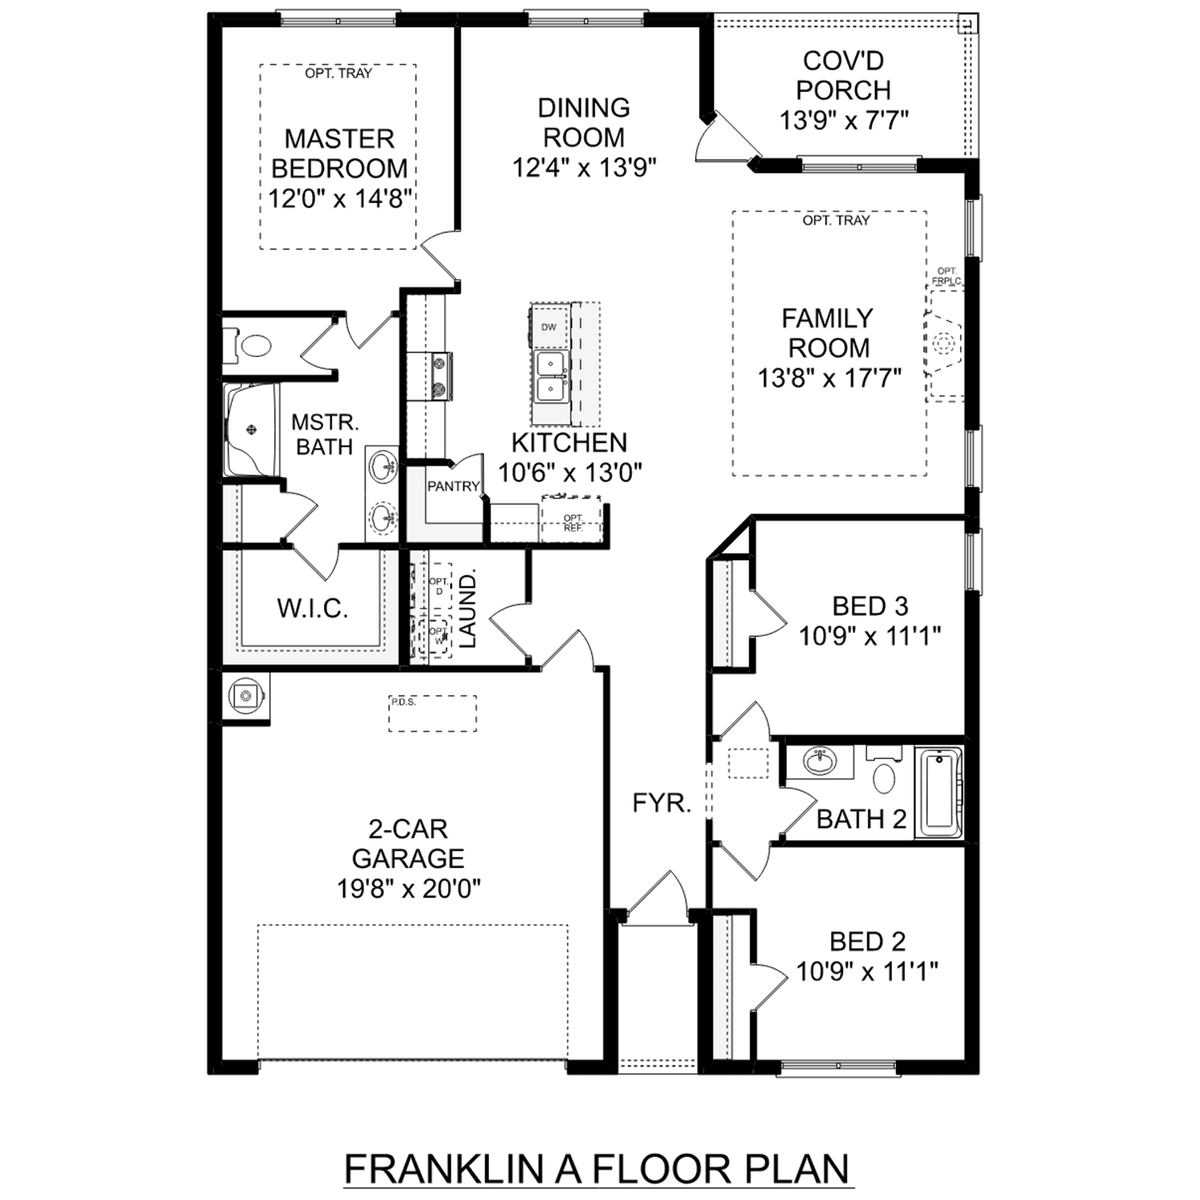 1 - The Franklin floor plan layout for 102 River Pointe Drive in Davidson Homes' Flint Meadows community.